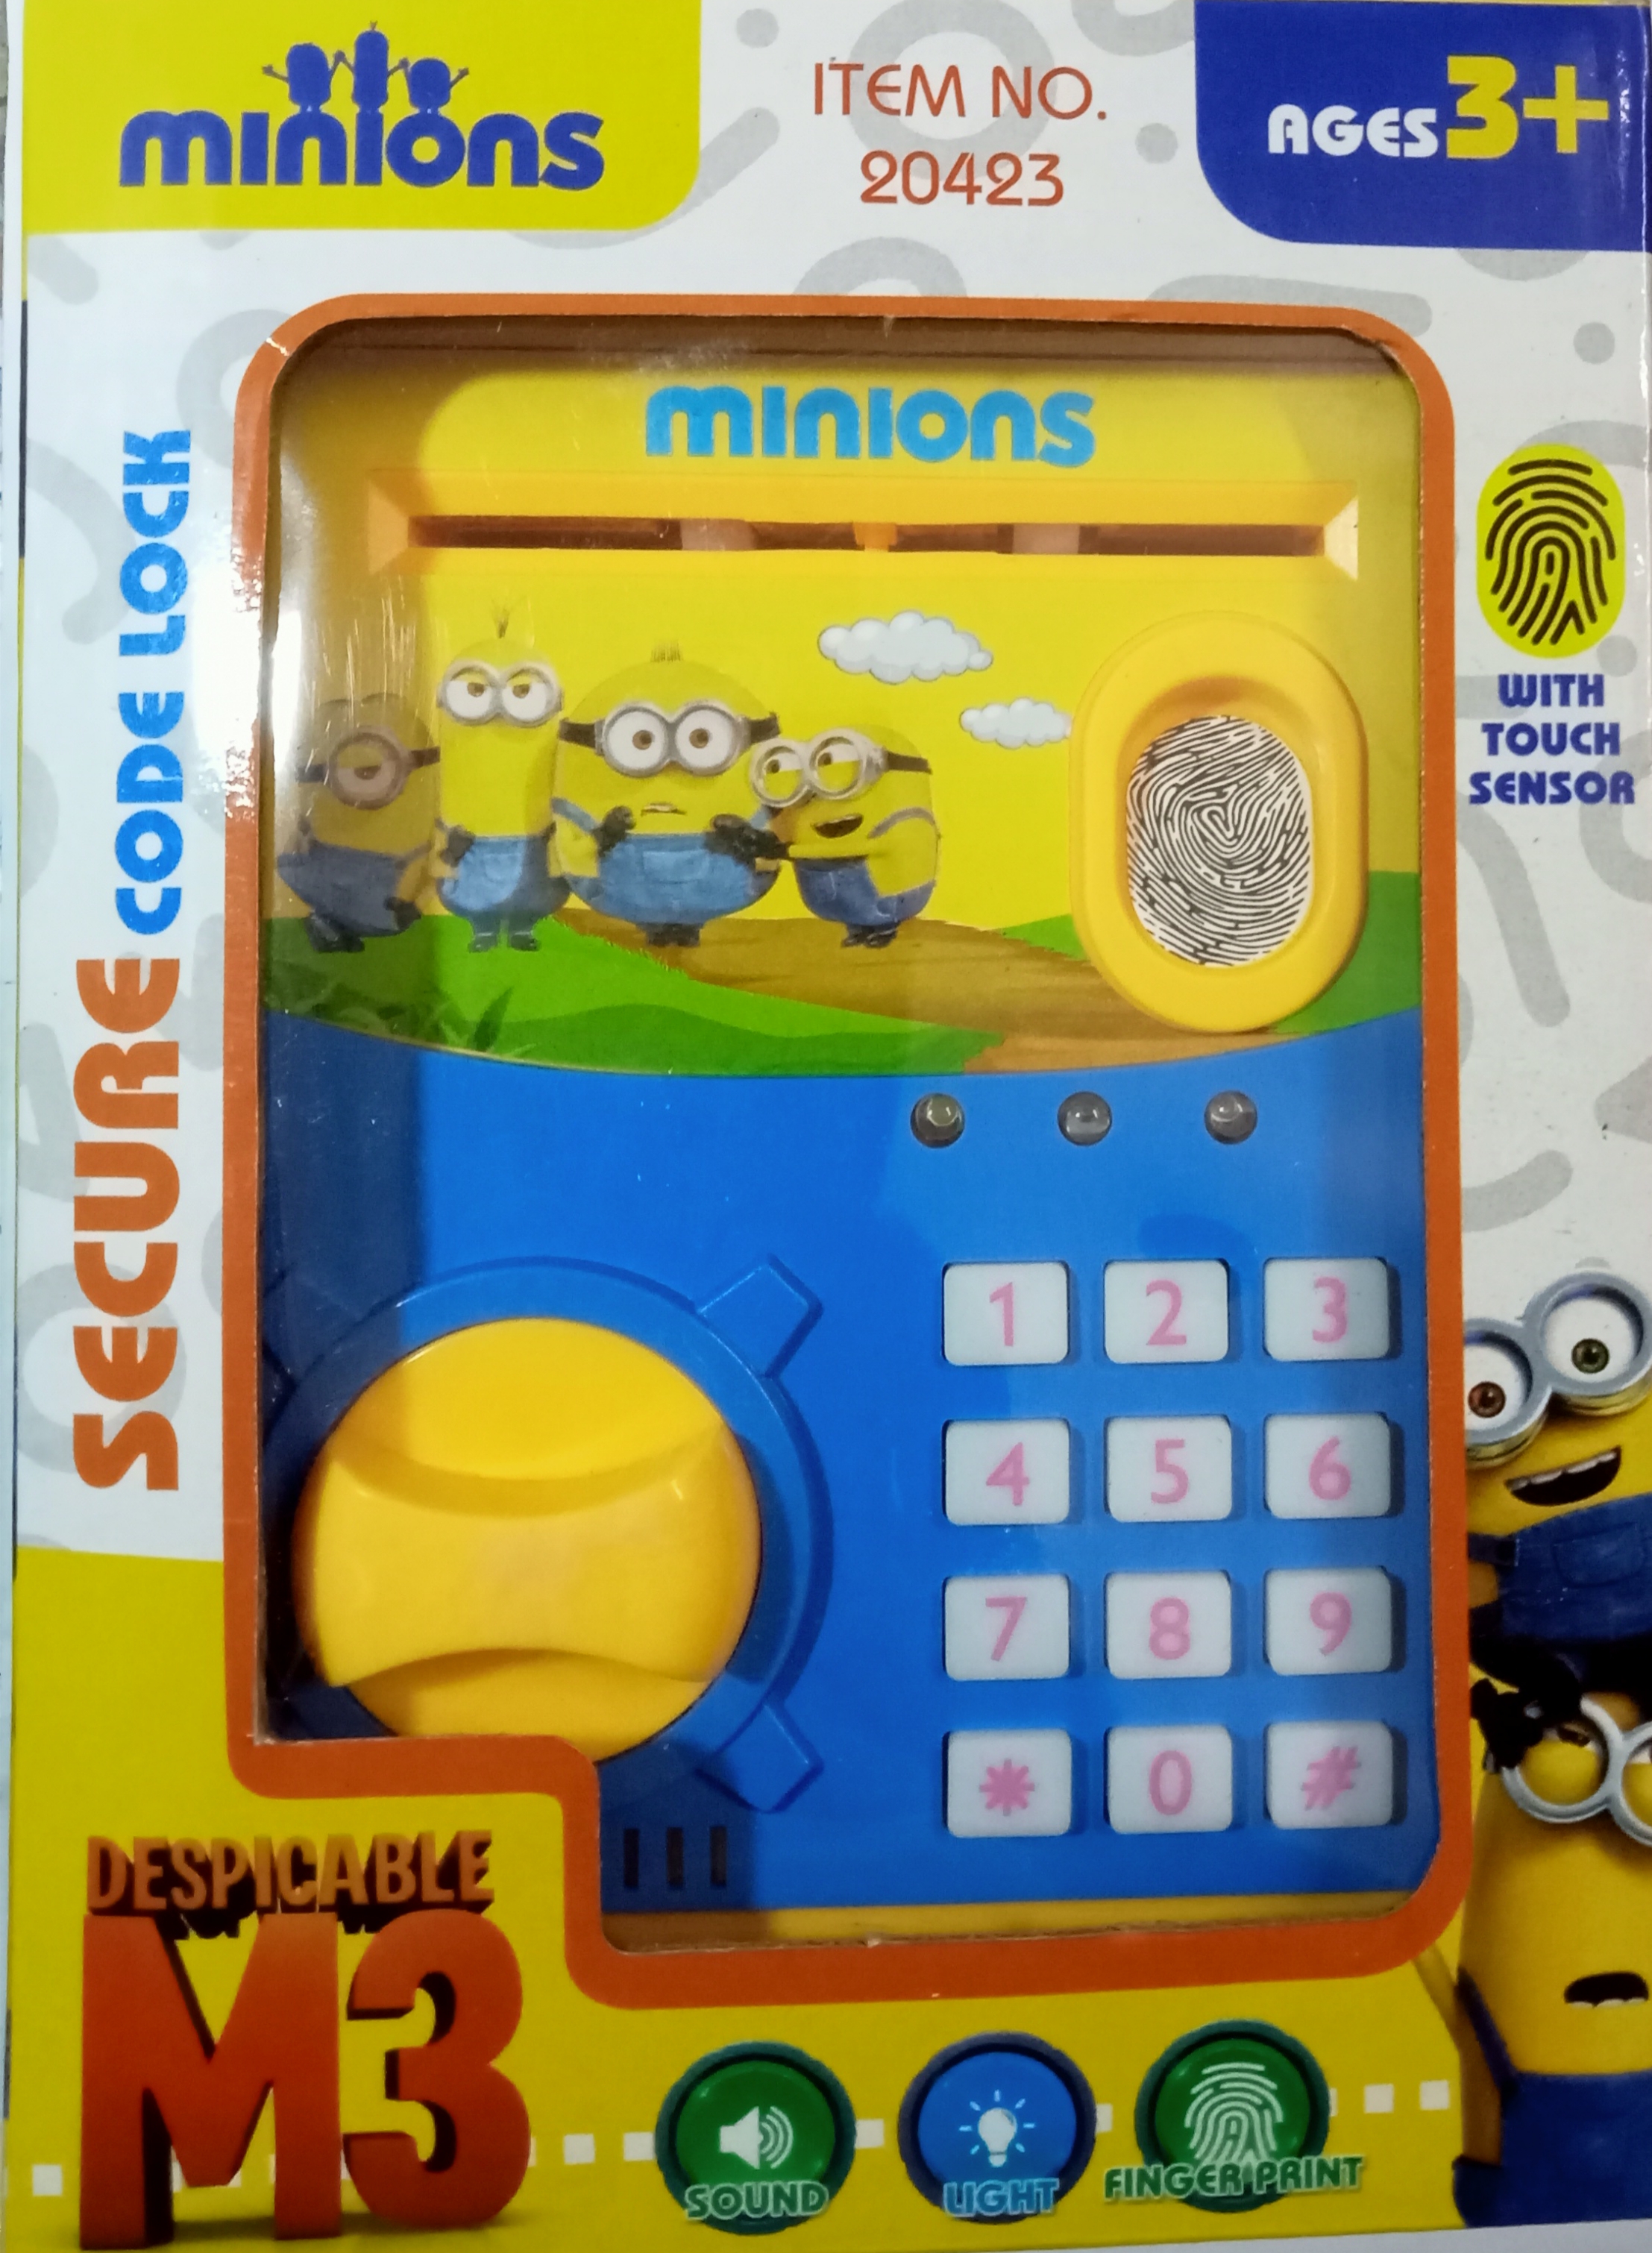 Money Safe ATM Kids Piggy Savings Bank with Electronic Lock Piggy Bank ATM for kids with Password & Finger Print also (Multi-Theme) (Minions)